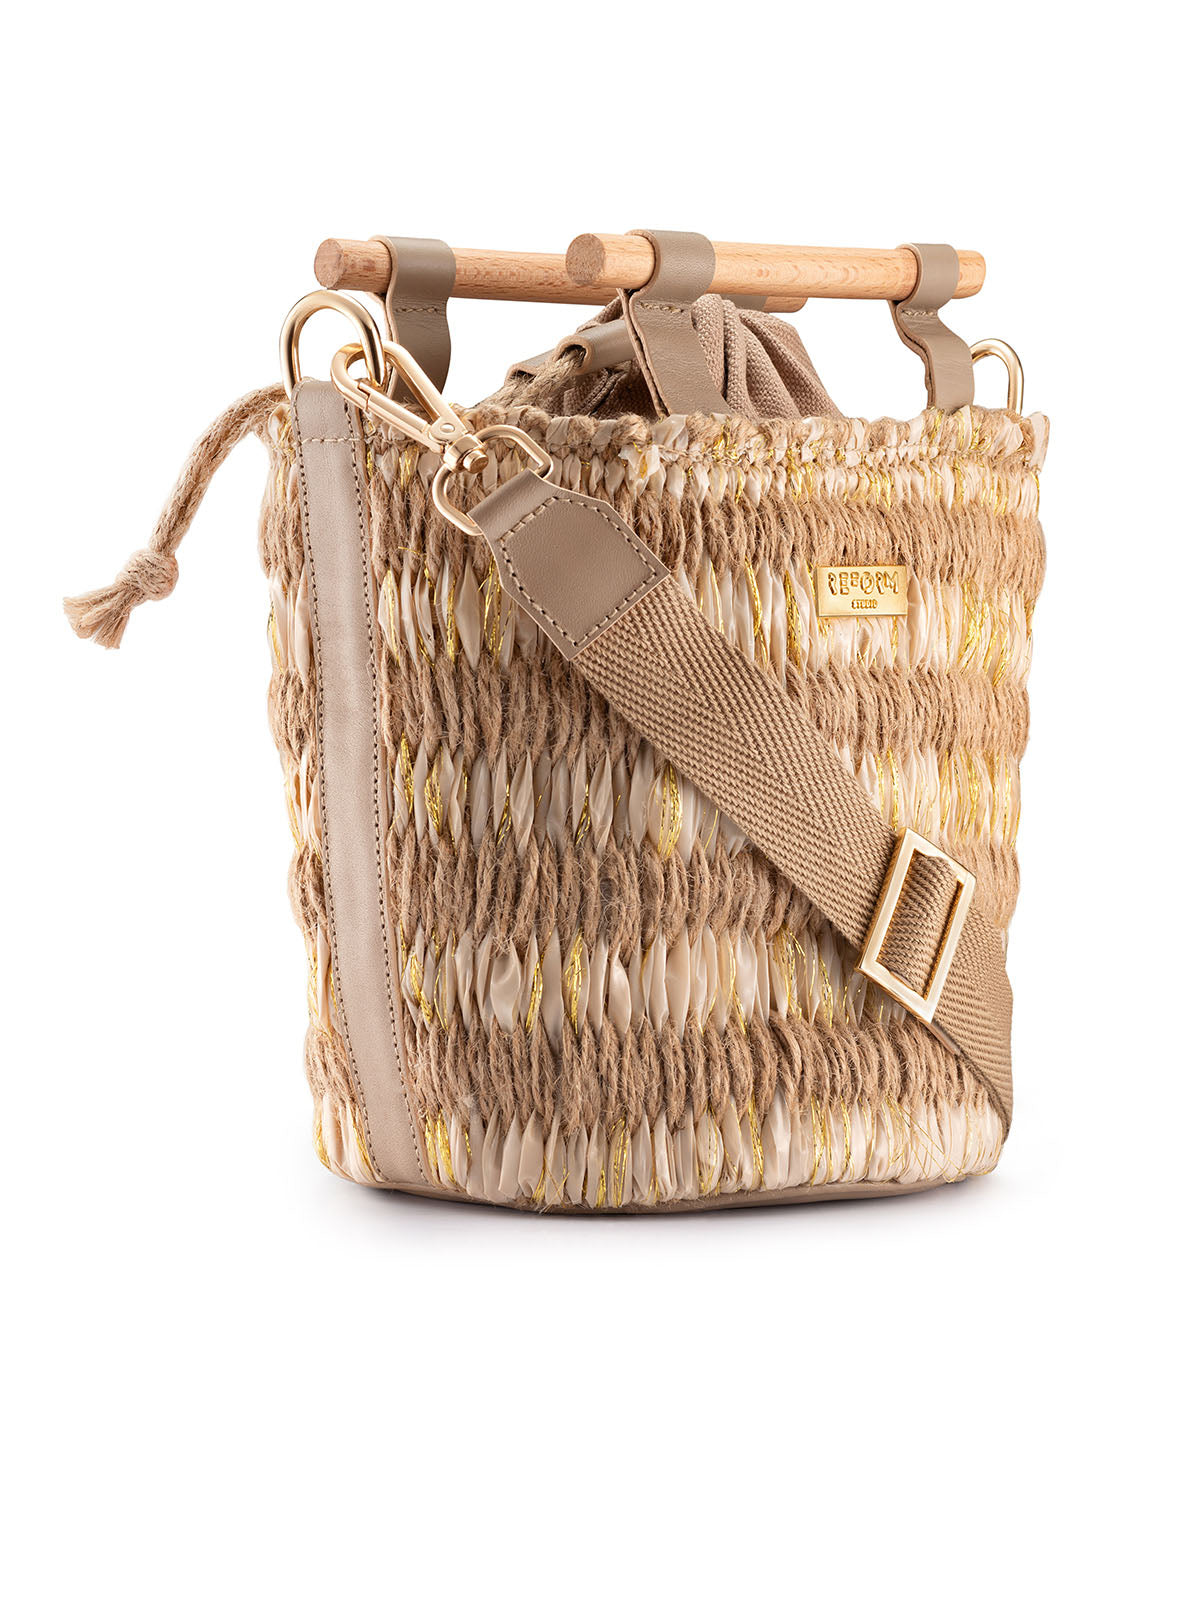 Mini Afro Basket in Beige and Gold